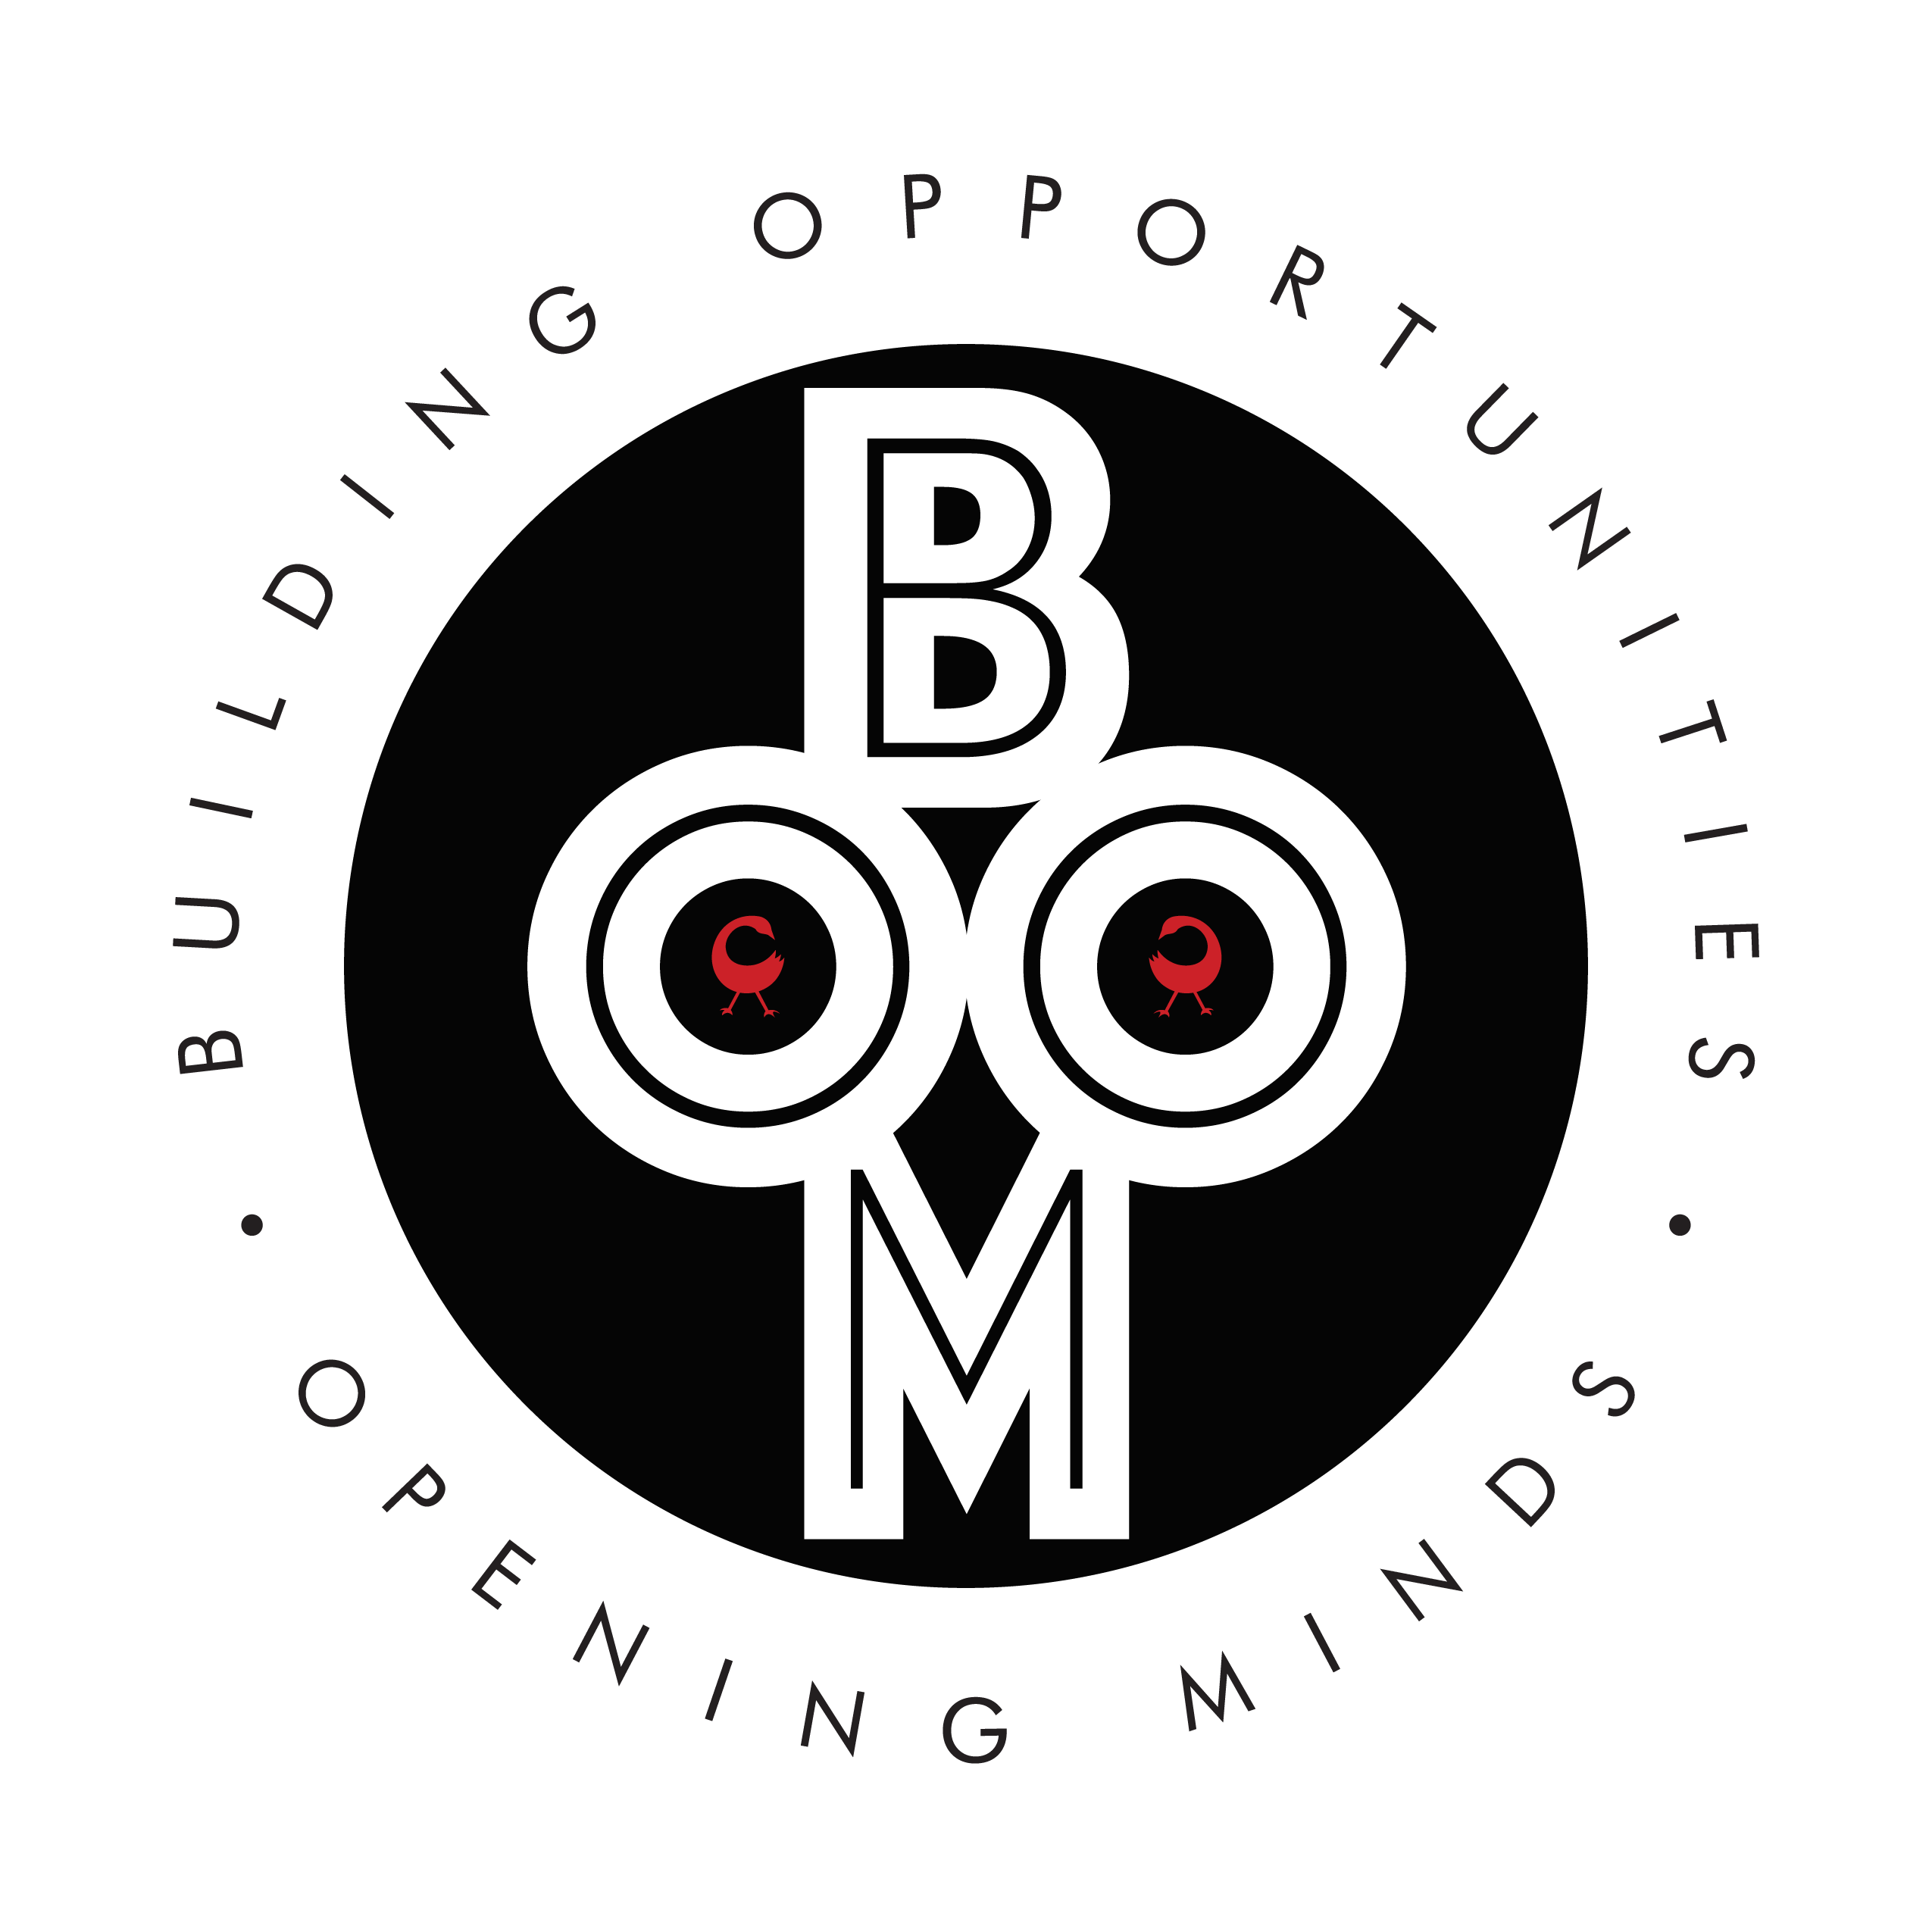 Building Opportunities + Opening Minds